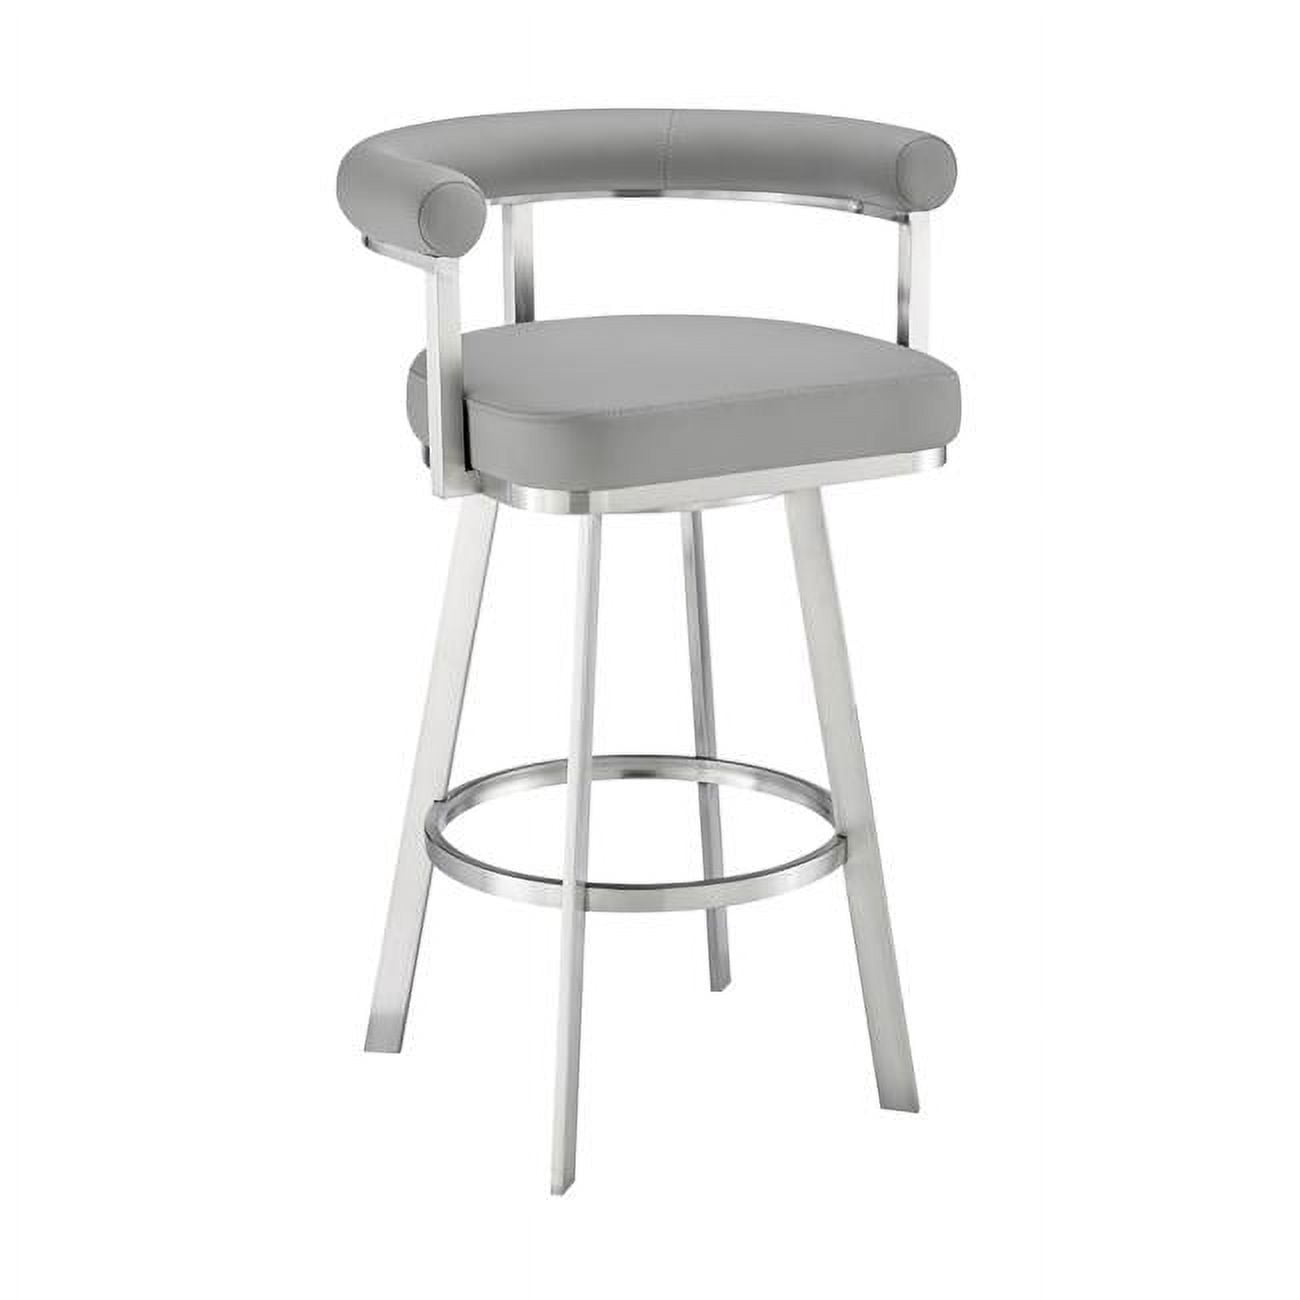 Picture of Armen Living 840254335677 38 x 23.5 x 21.5 in. Nolagam Swivel Bar Stool in Brushed Stainless Steel with Light Grey Faux Leather